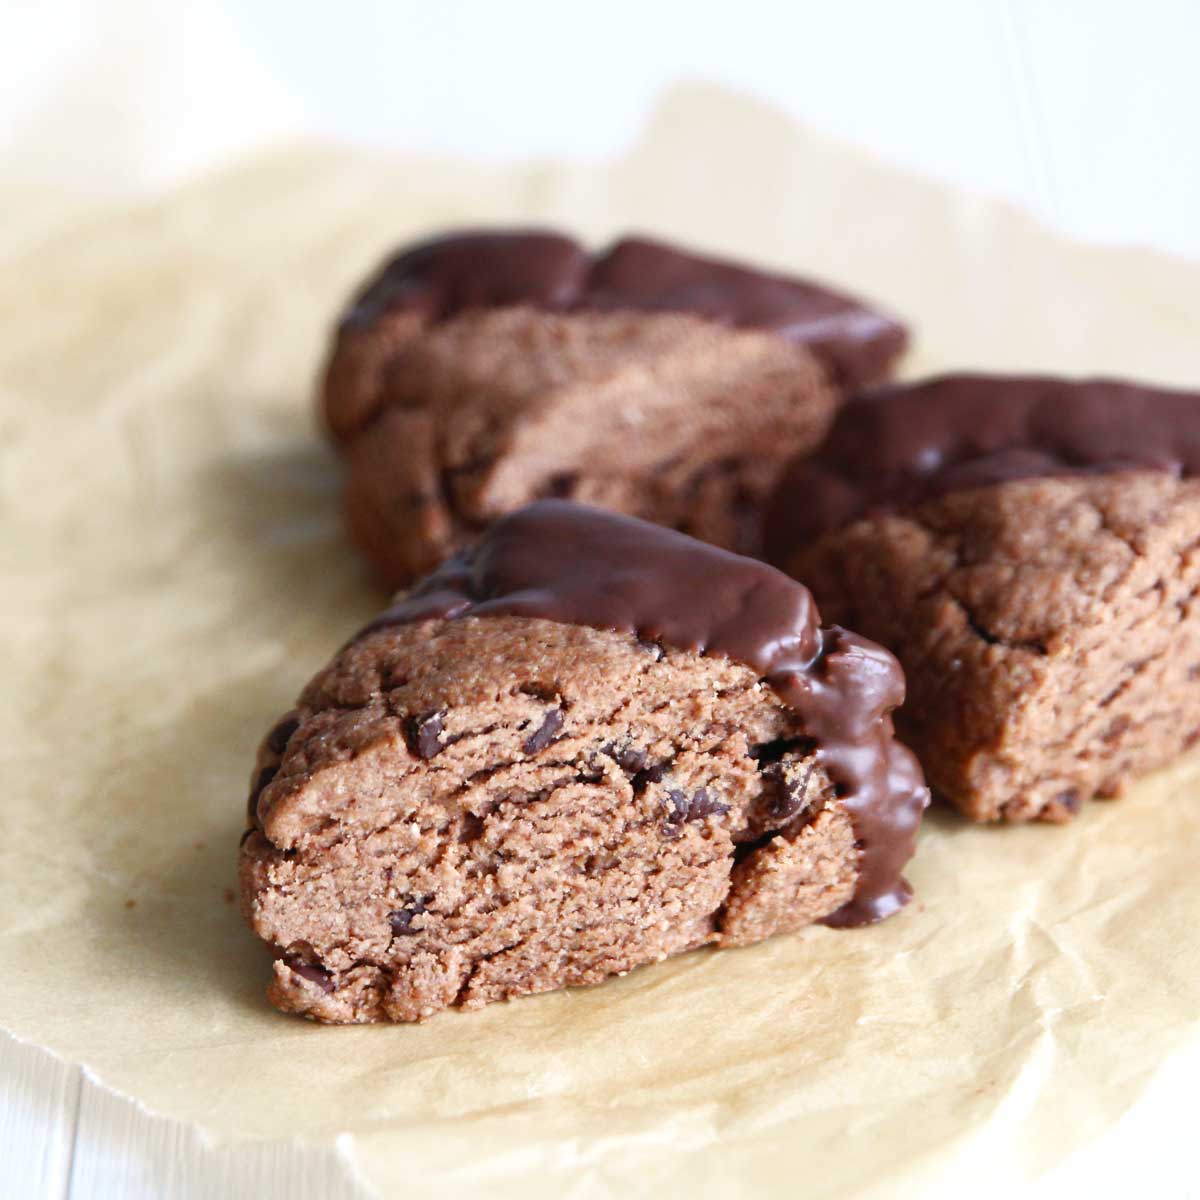 Vegan Double Chocolate Scones made with Coconut Oil